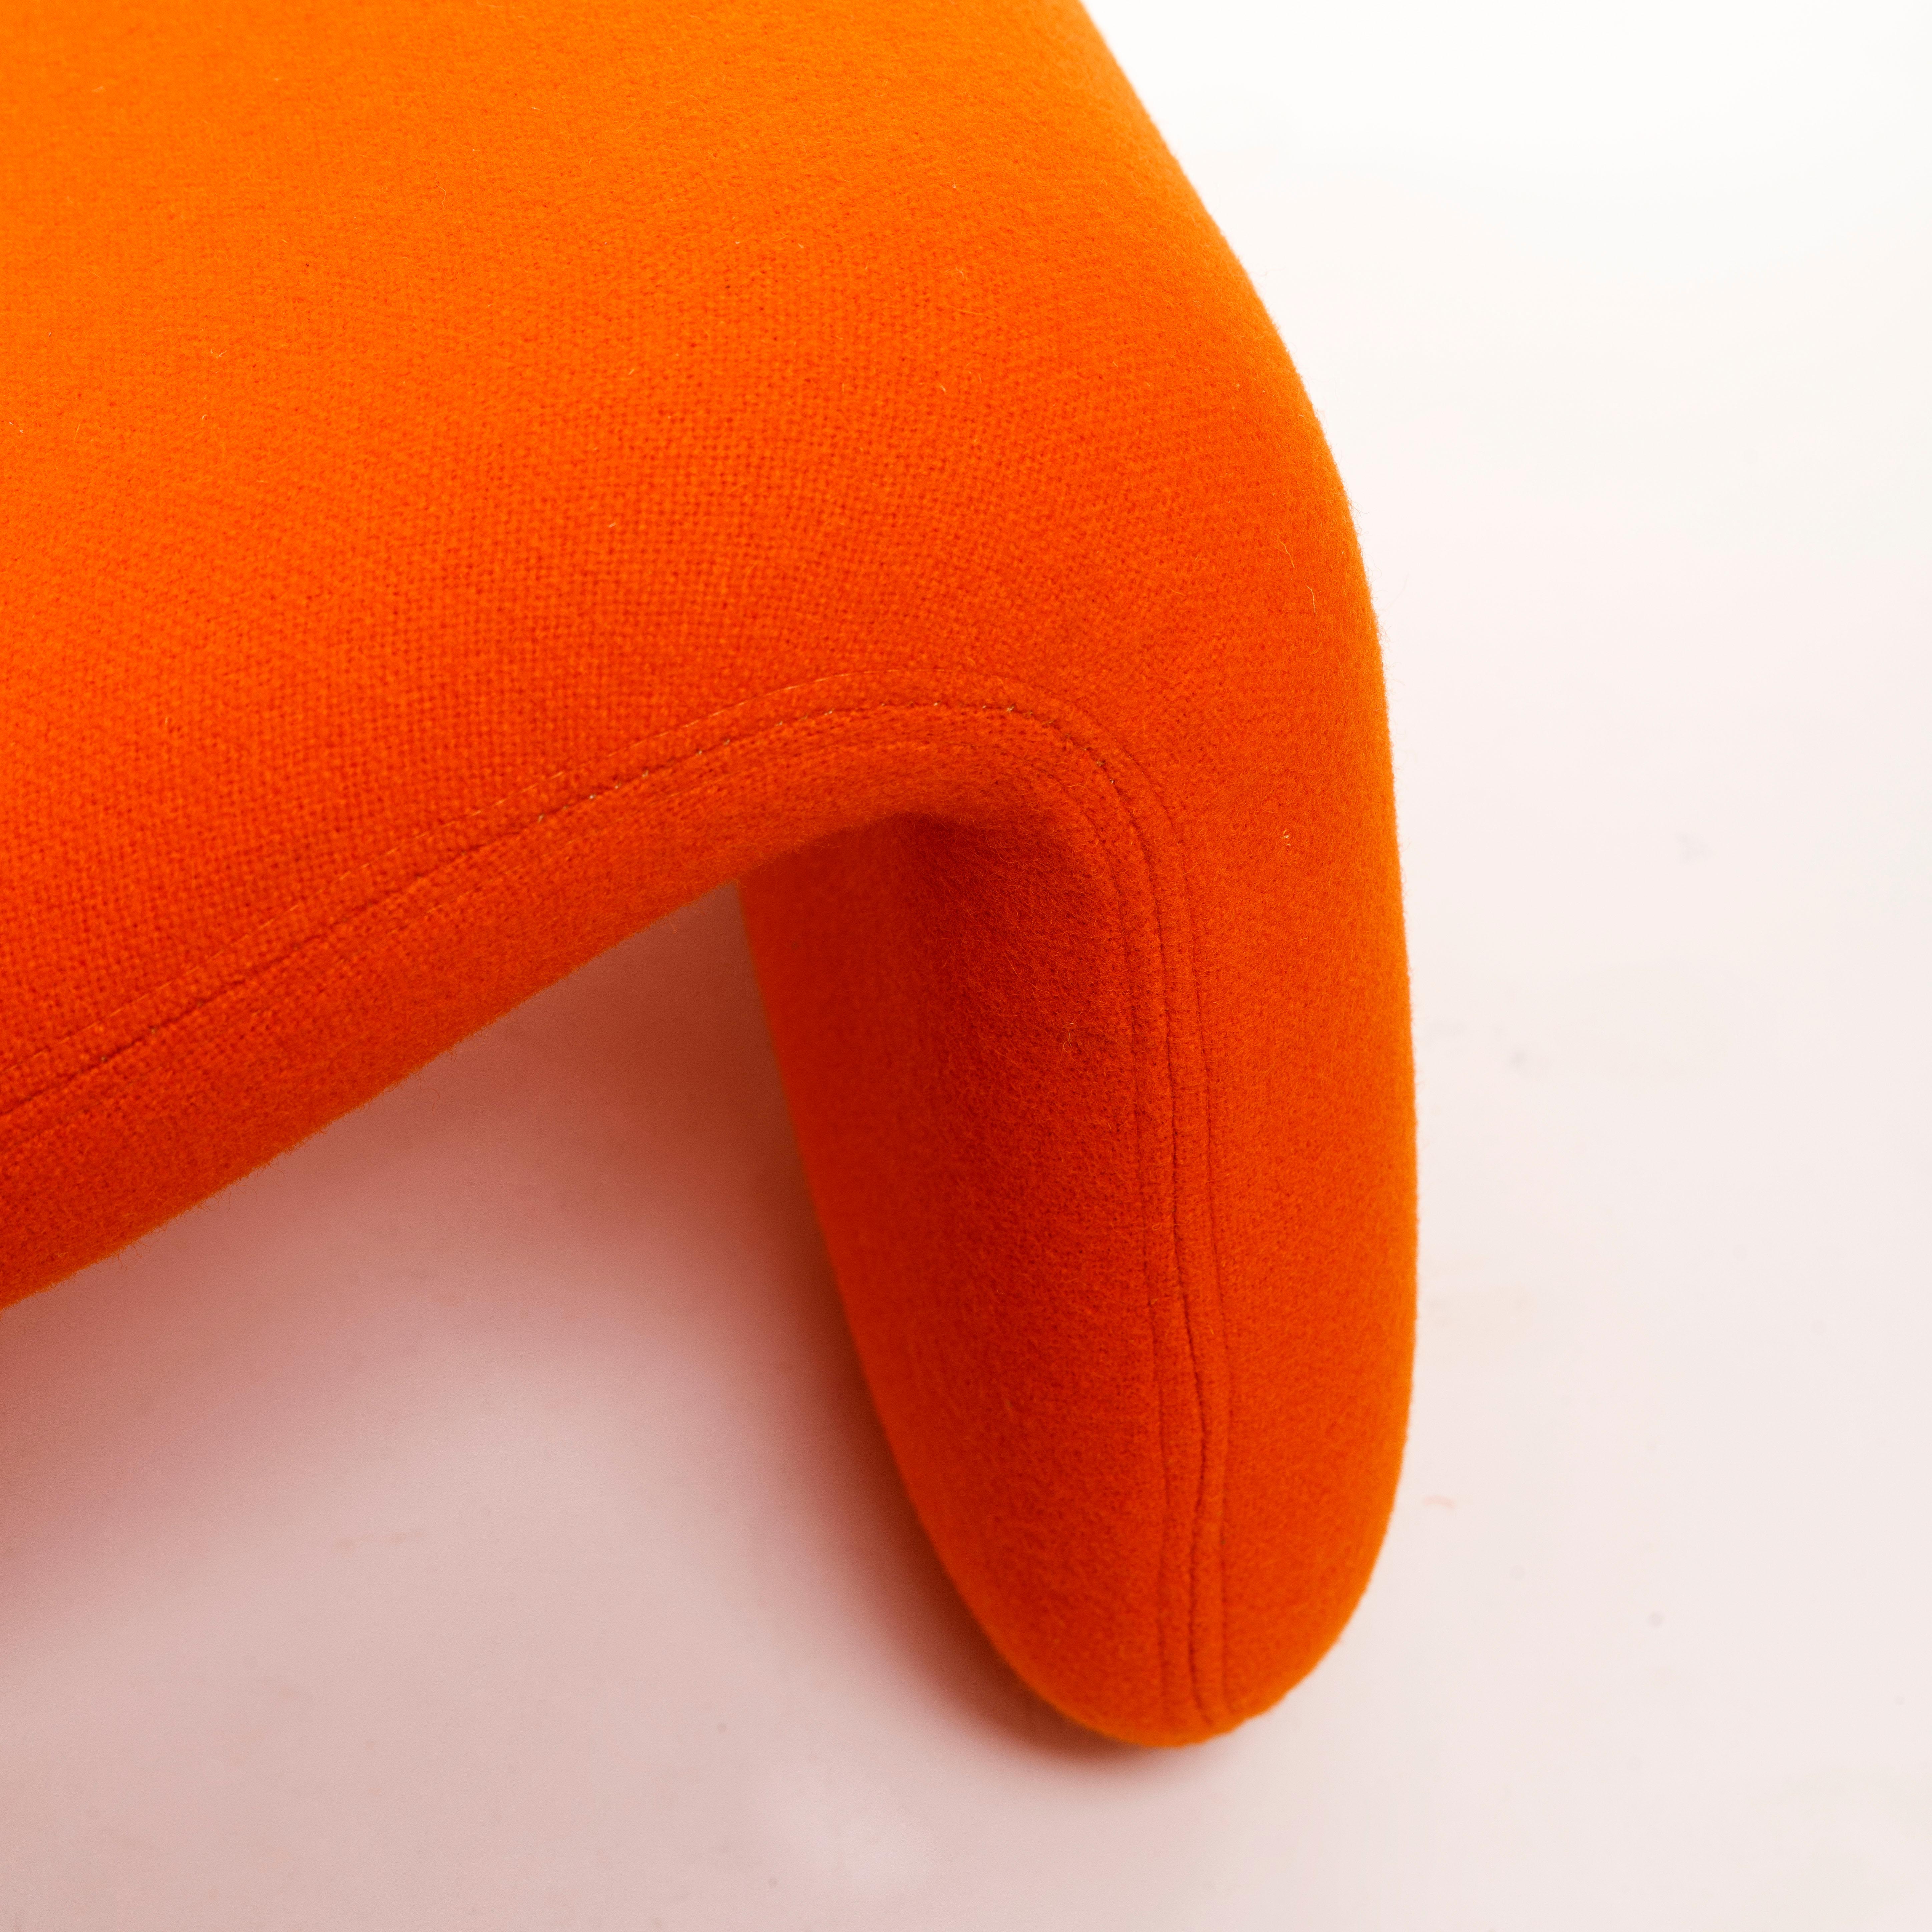 Olivier Mourgue Iconic Djinn Chair Airborne 1963 Reupholstered in Orange Kvadrat For Sale 3